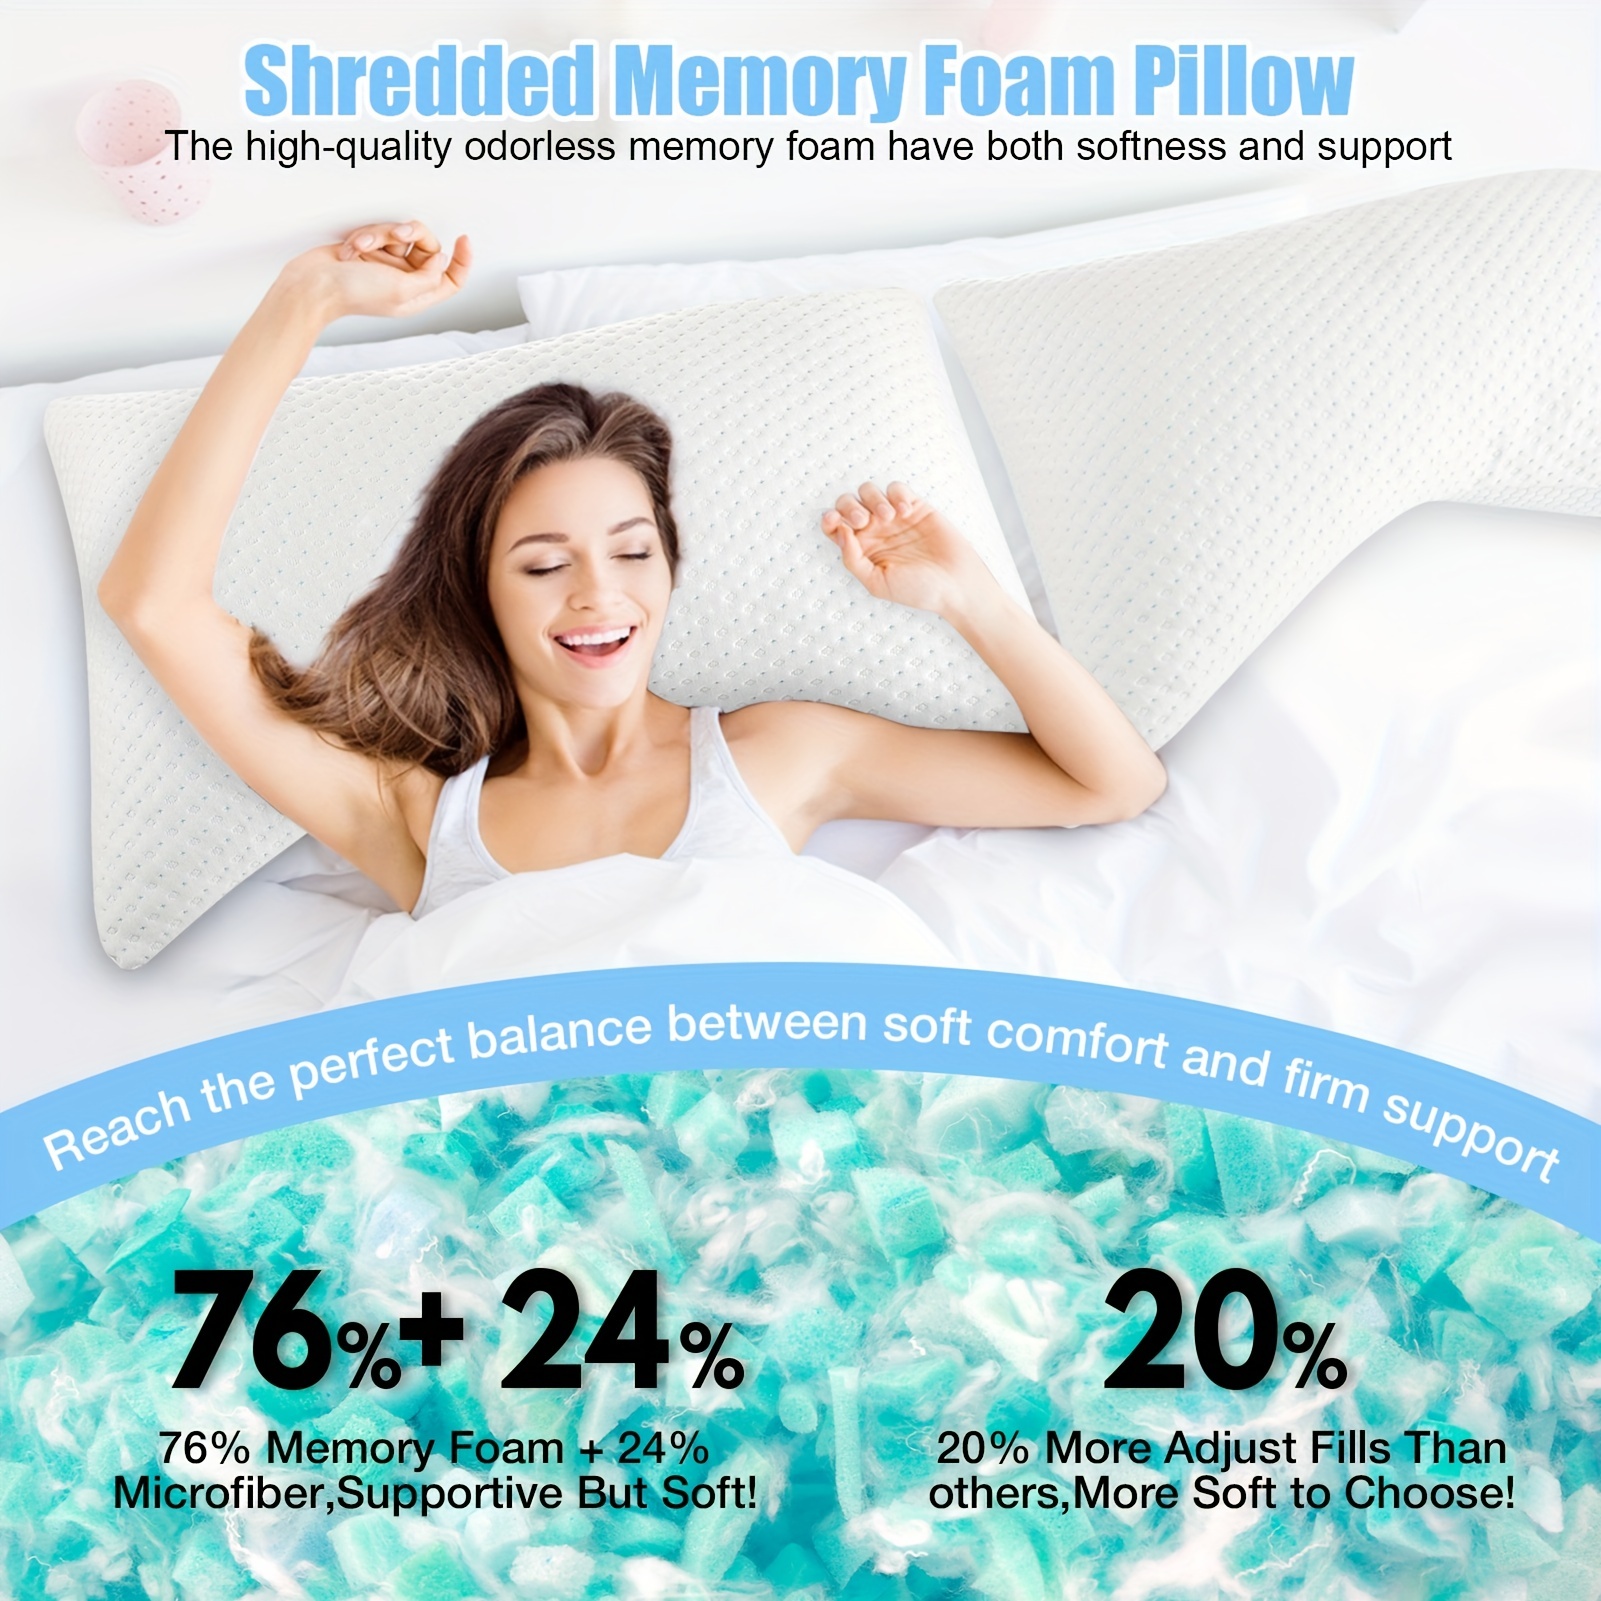 Ultra Pain Relief Cooling Pillow for Neck Support, Adjustable Cervical Pillow Cozy Sleeping, Odorless Ergonomic Contour Memory Foam Pillows